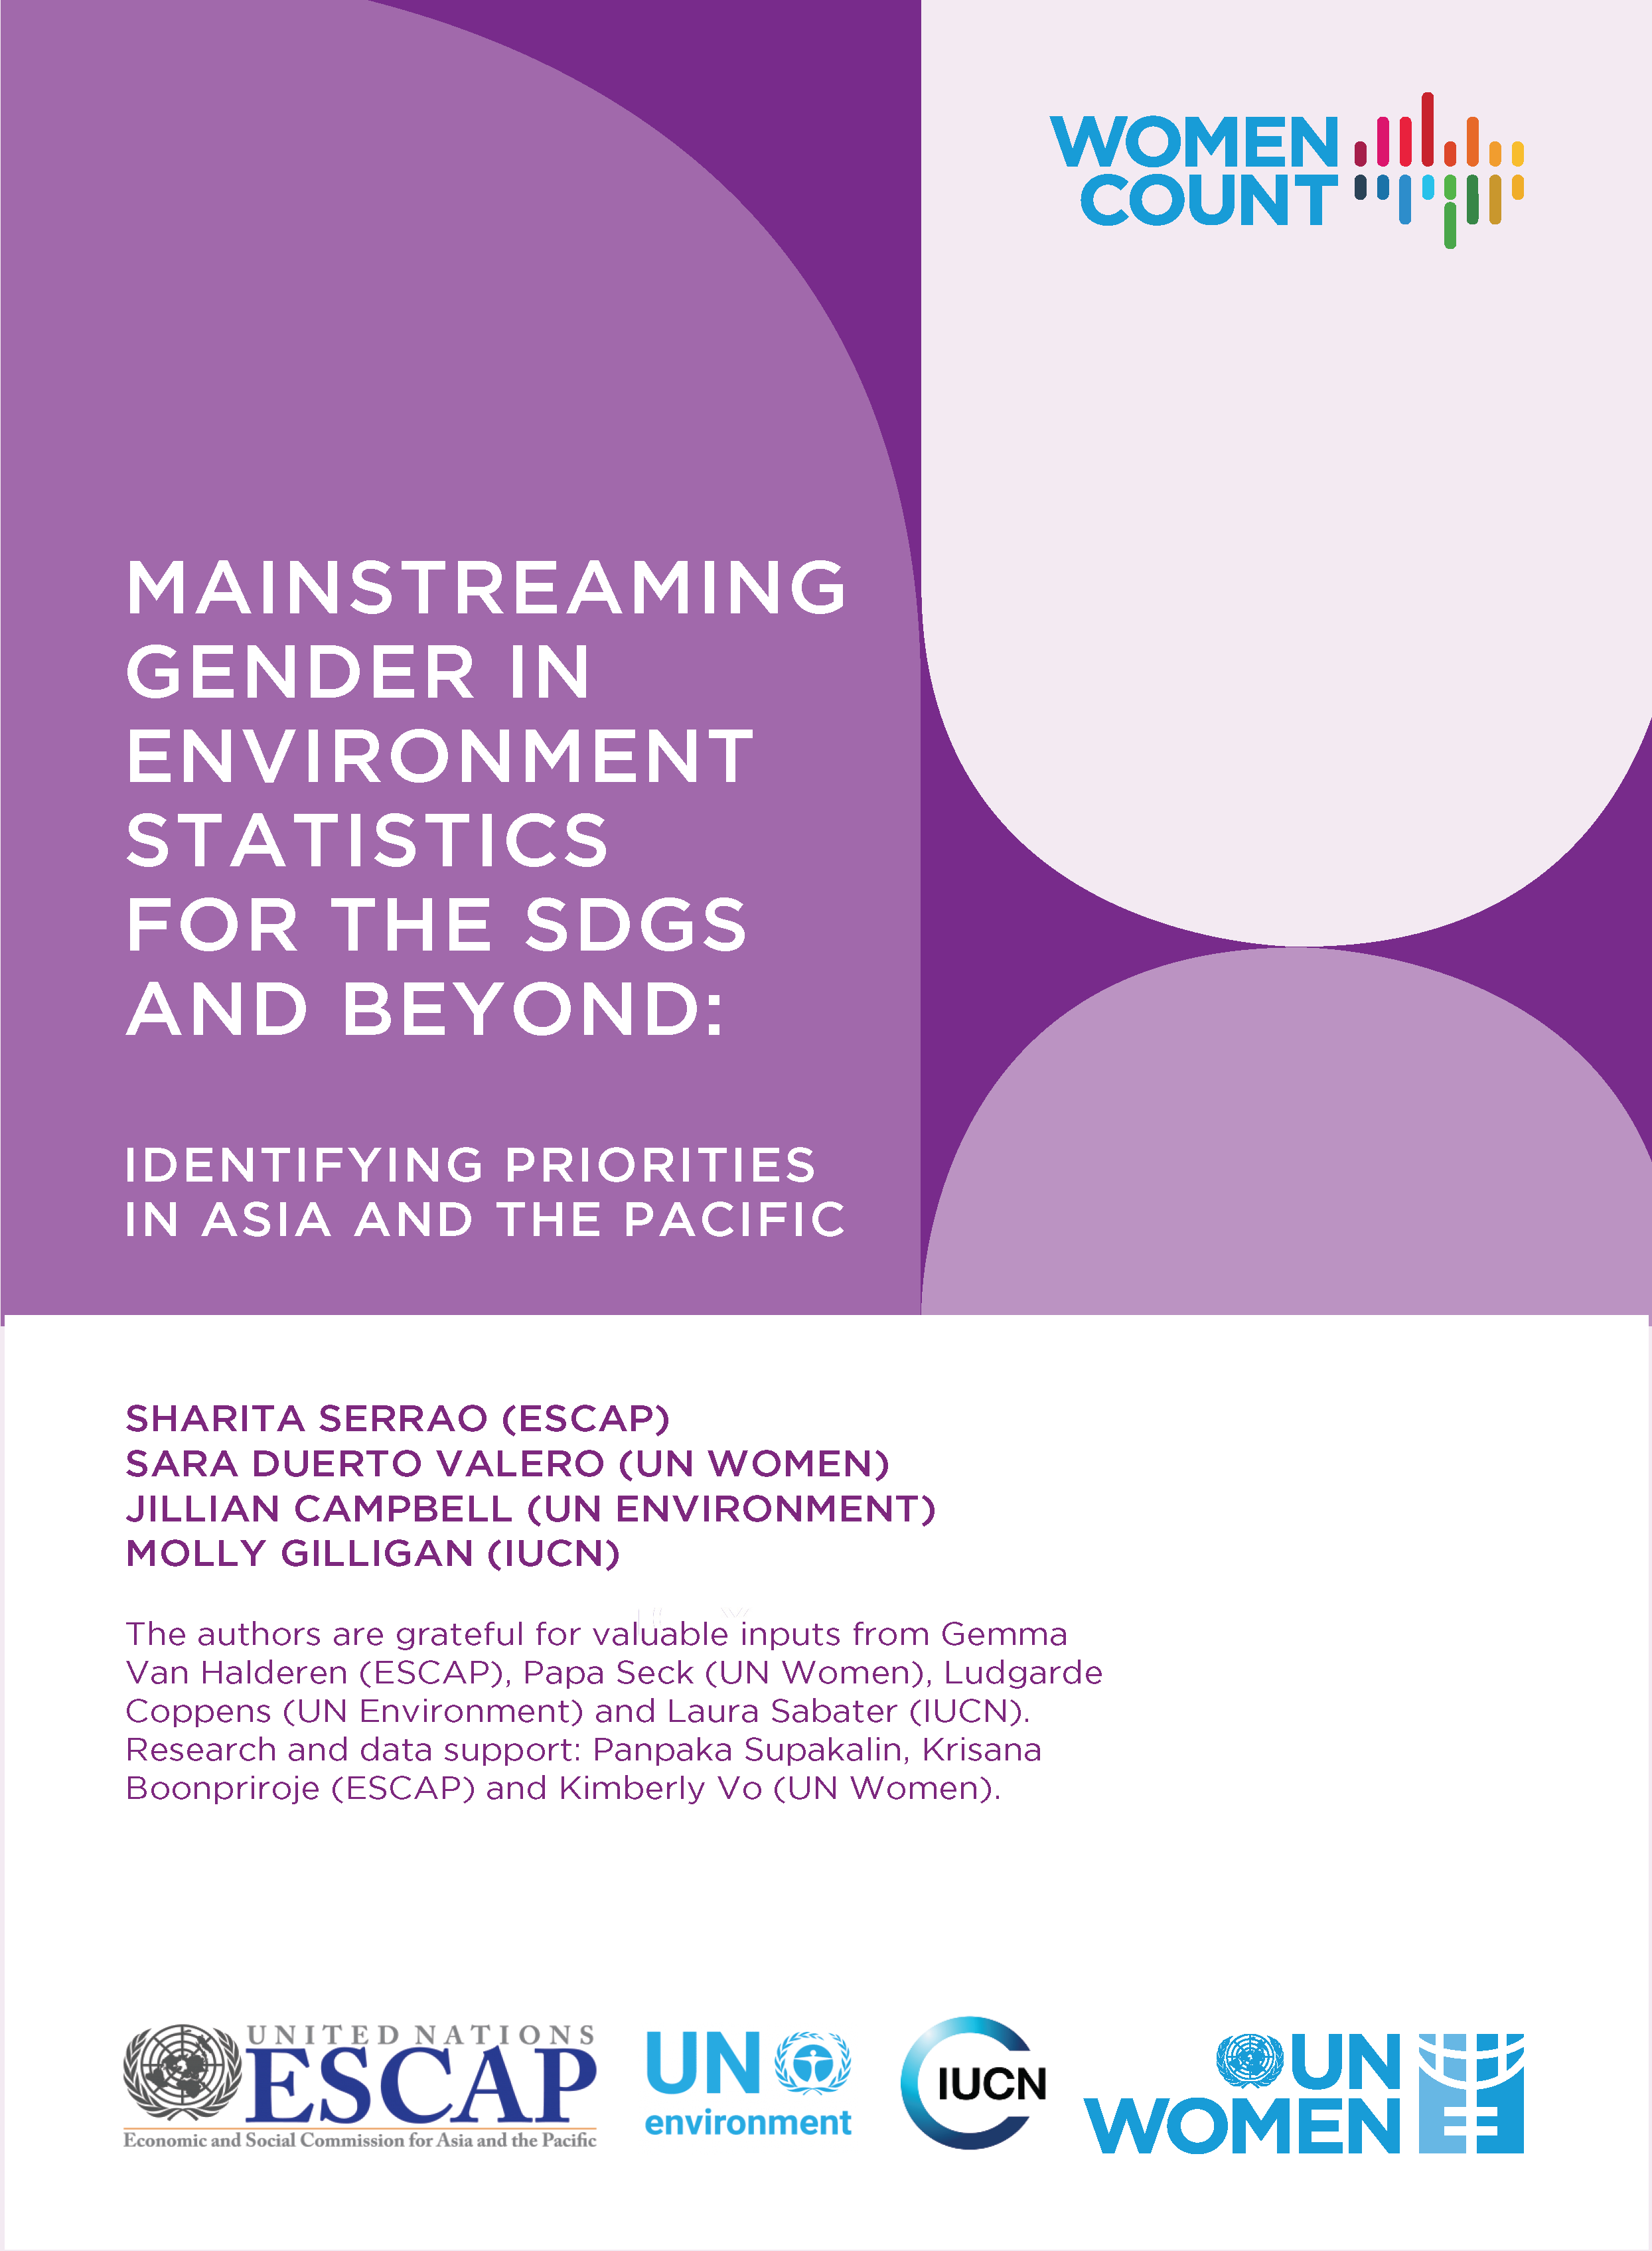 Mainstreaming gender in environment statistics in Asia-Pacific